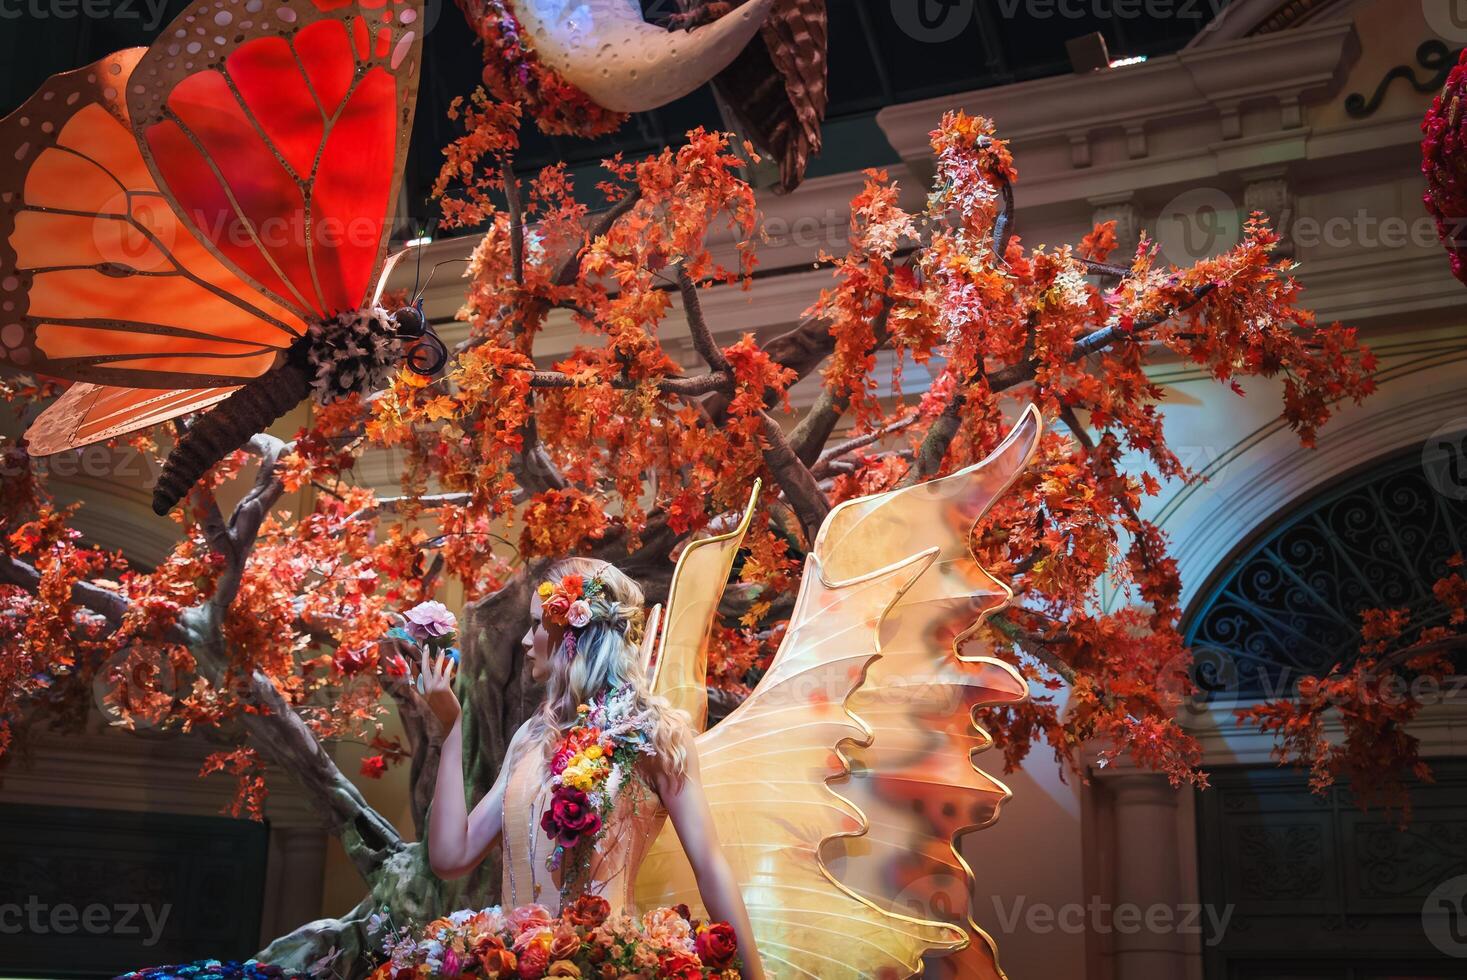 Whimsical fairy figure with golden wings in enchanted indoor display, Las Vegas. photo